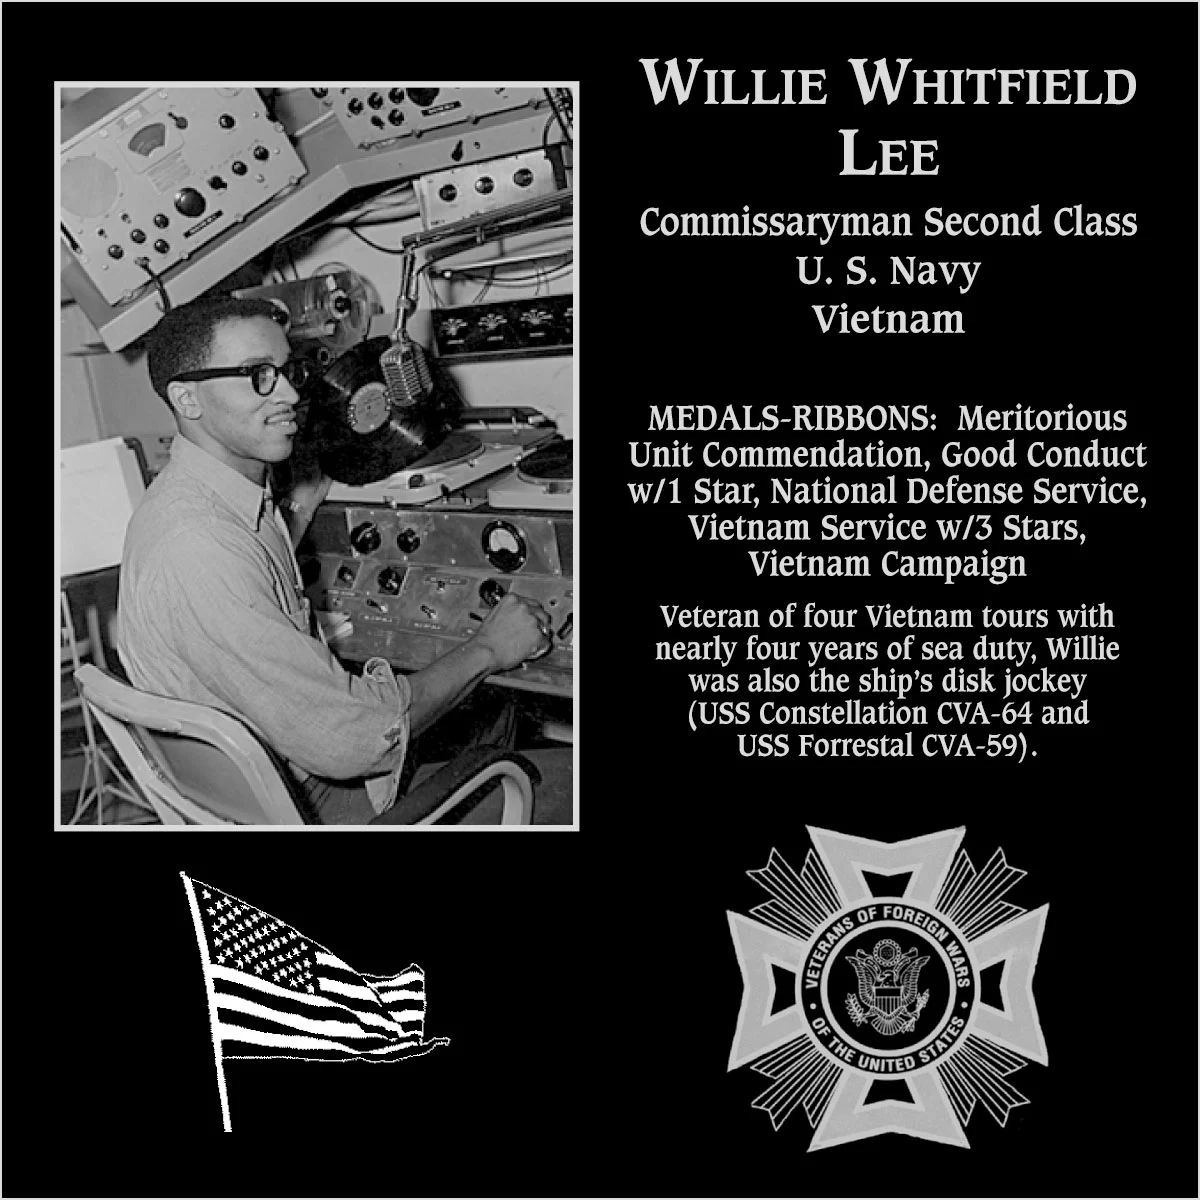 Willie Whitfield Lee